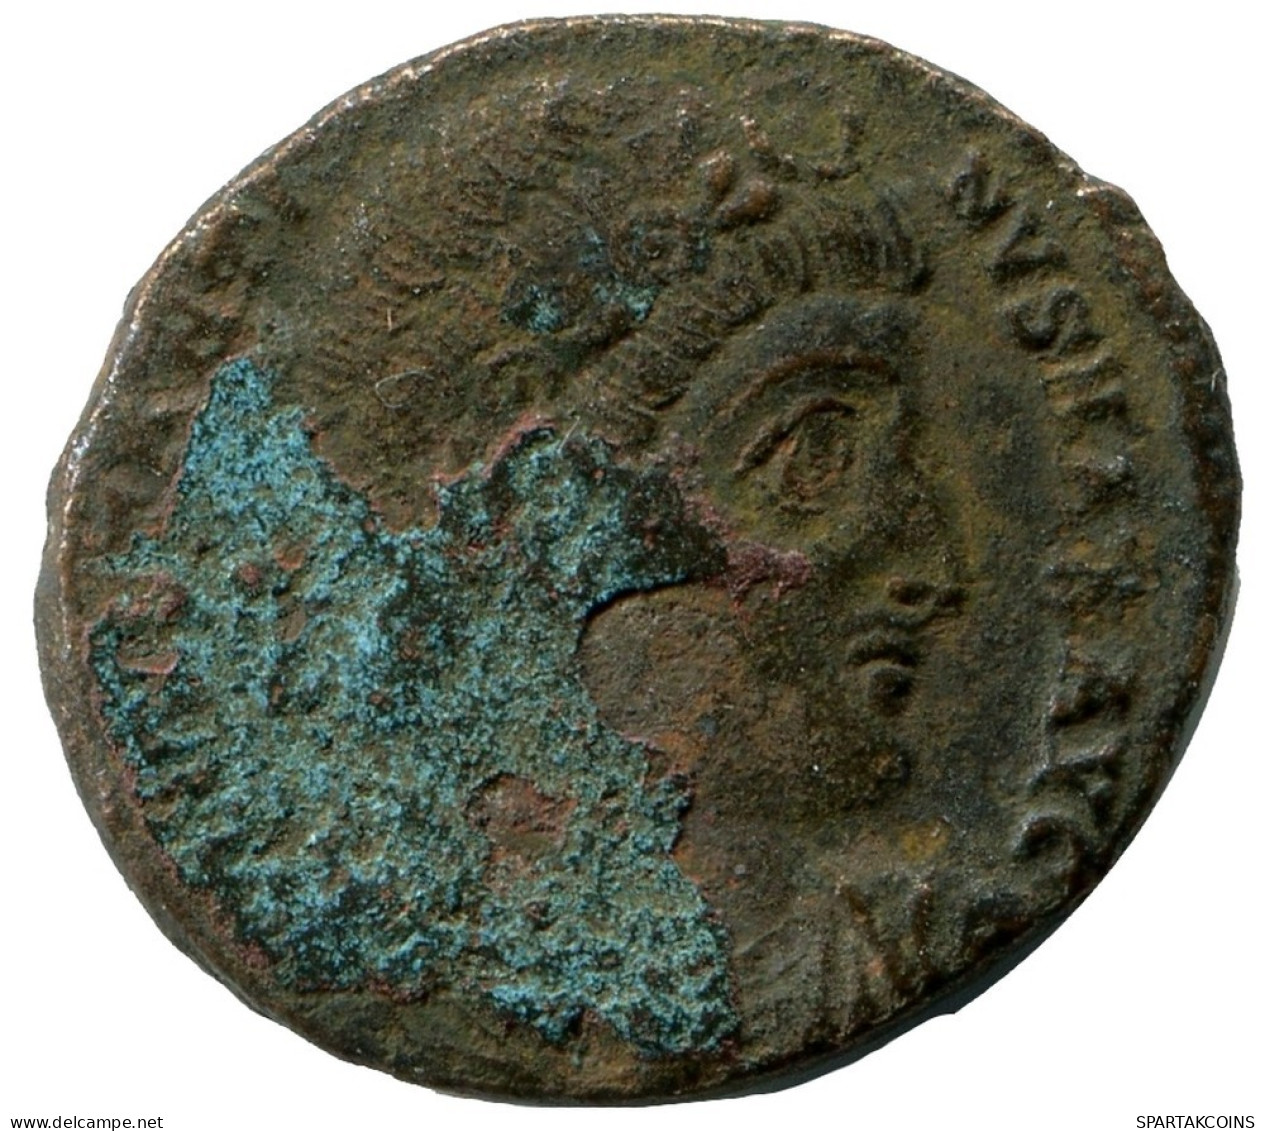 CONSTANTINE I MINTED IN ANTIOCH FOUND IN IHNASYAH HOARD EGYPT #ANC10588.14.U.A - The Christian Empire (307 AD To 363 AD)